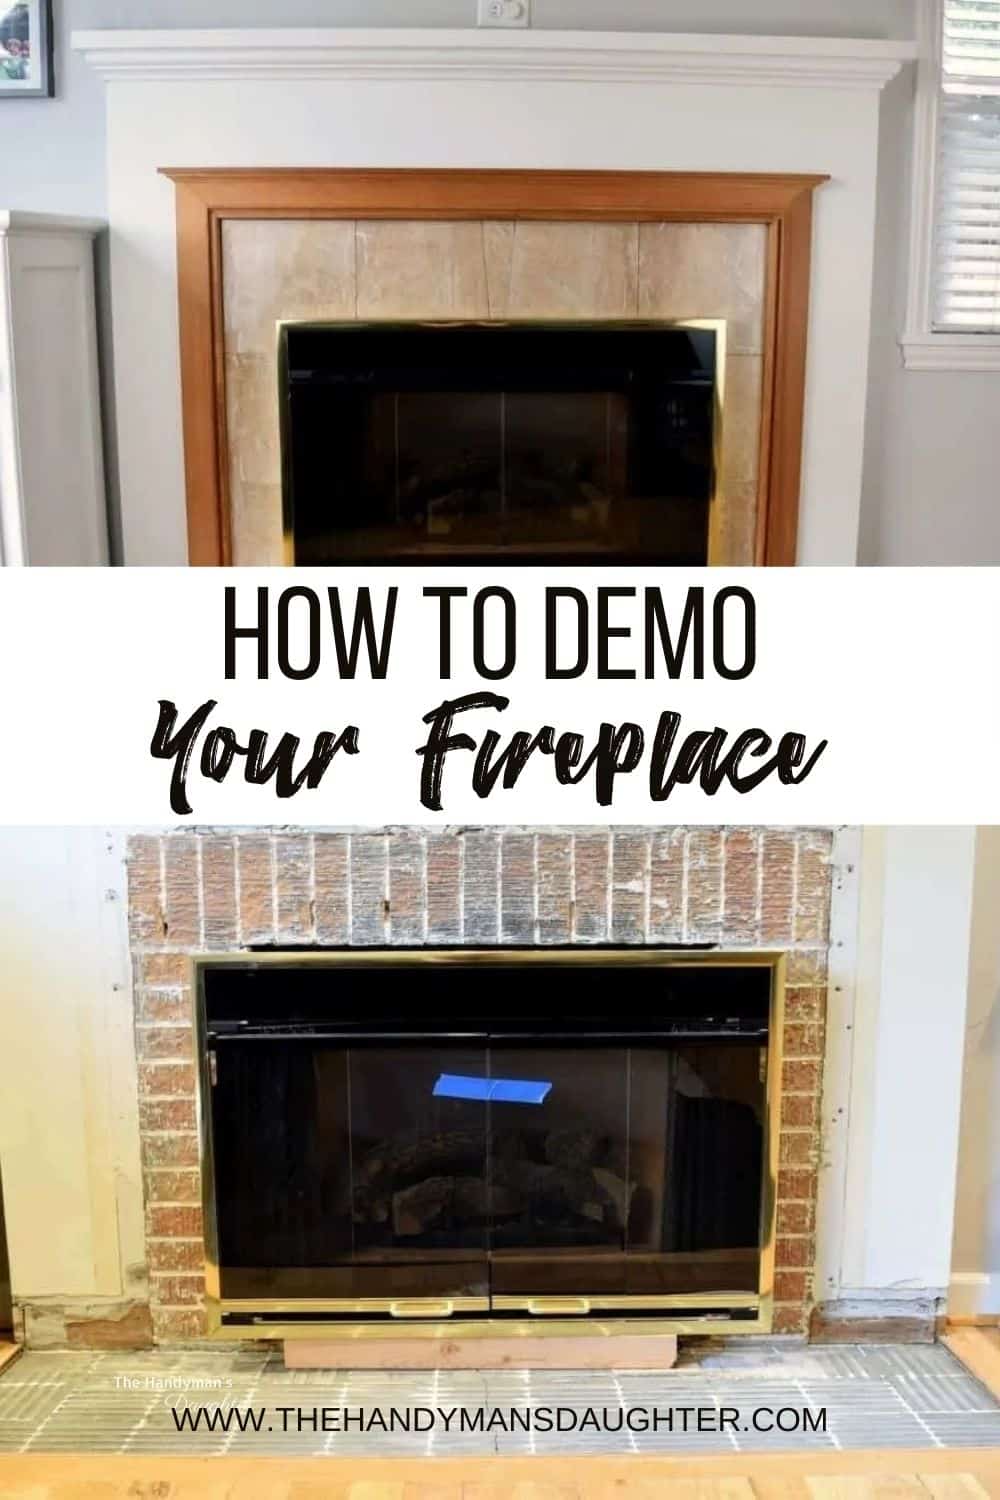 befroe and after image of fireplace demo with text overlay